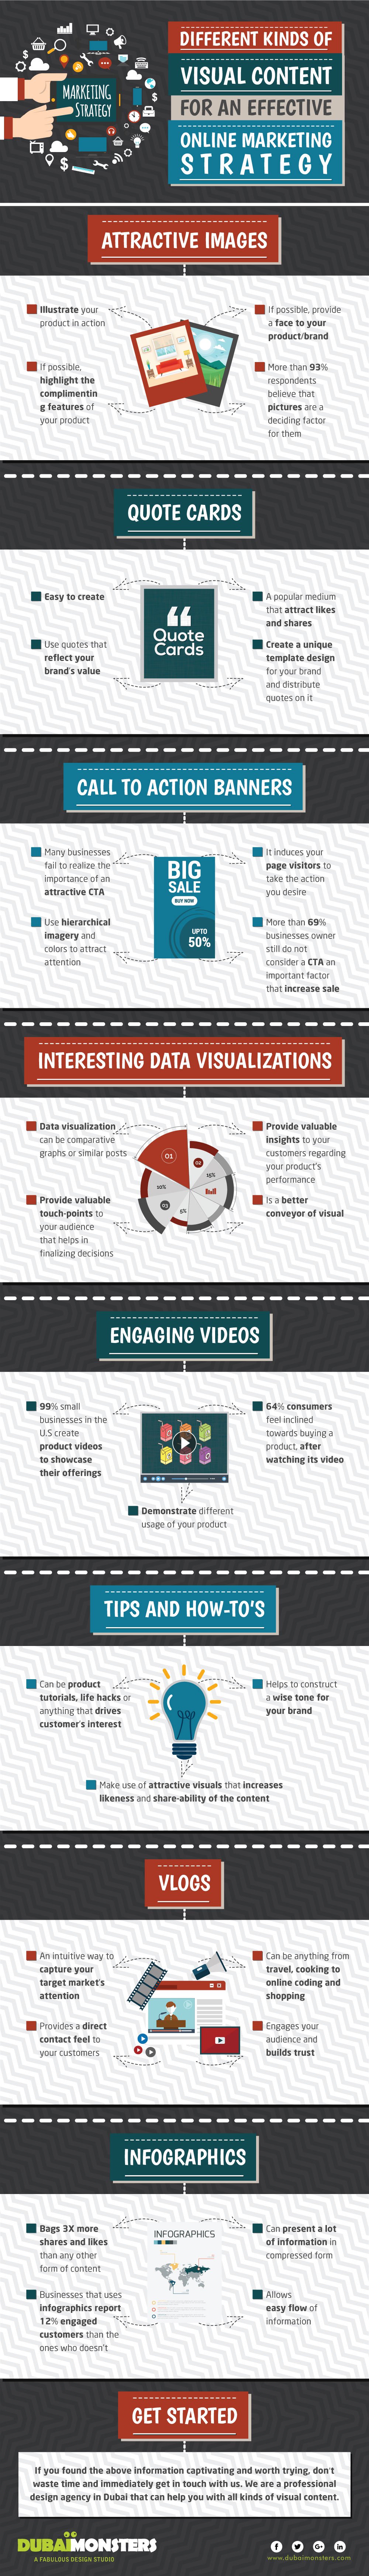 Different Kinds of Visual Content for an Effective Online Marketing Strategy